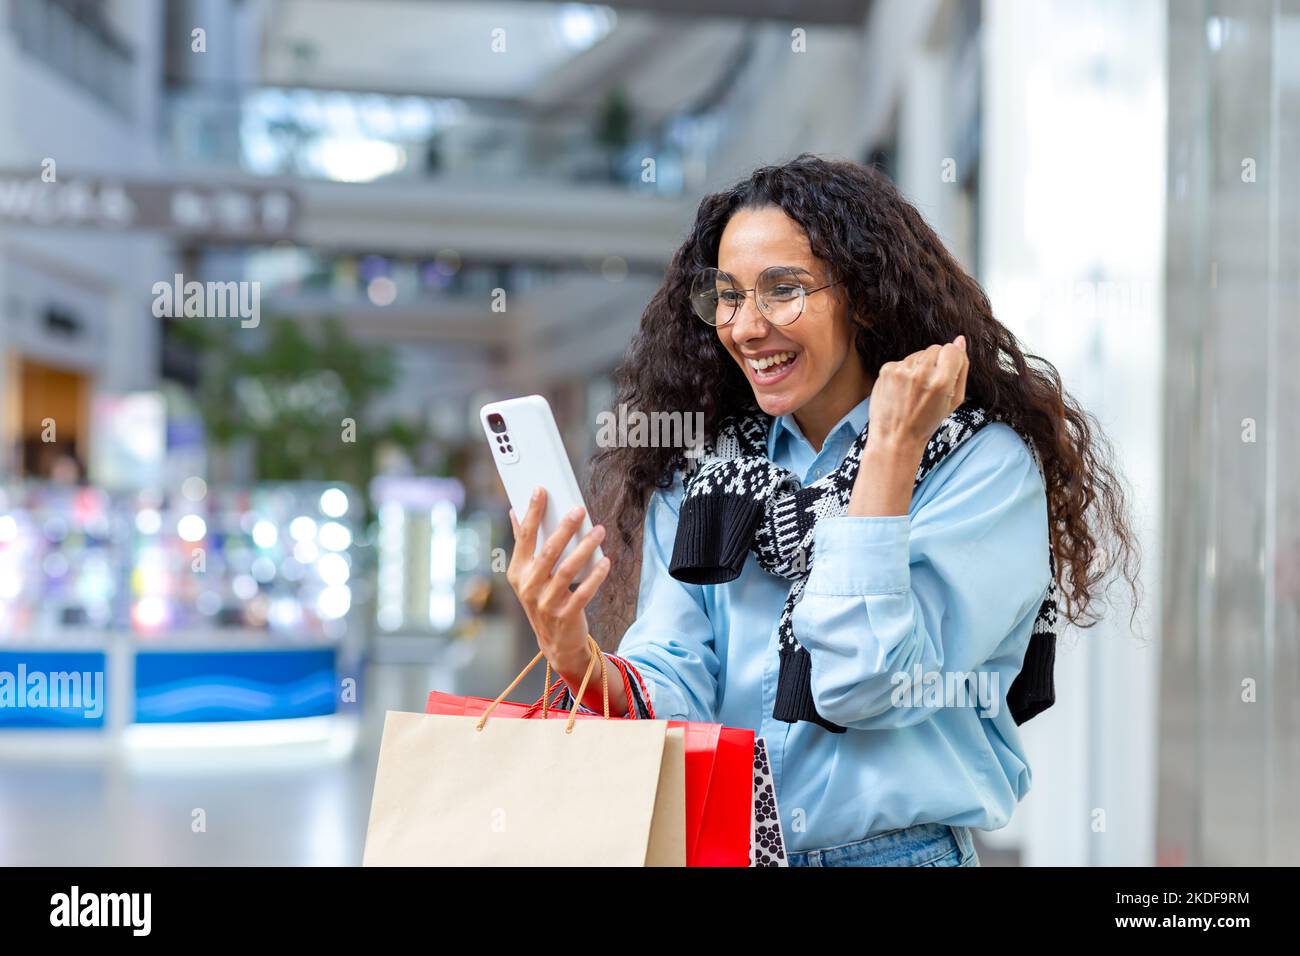 Portrait of happy woman shopper, Hispanic woman inside mall, uses smartphone, browses online discounts and sales, holds hand up, celebrates received offer, win. Stock Photo